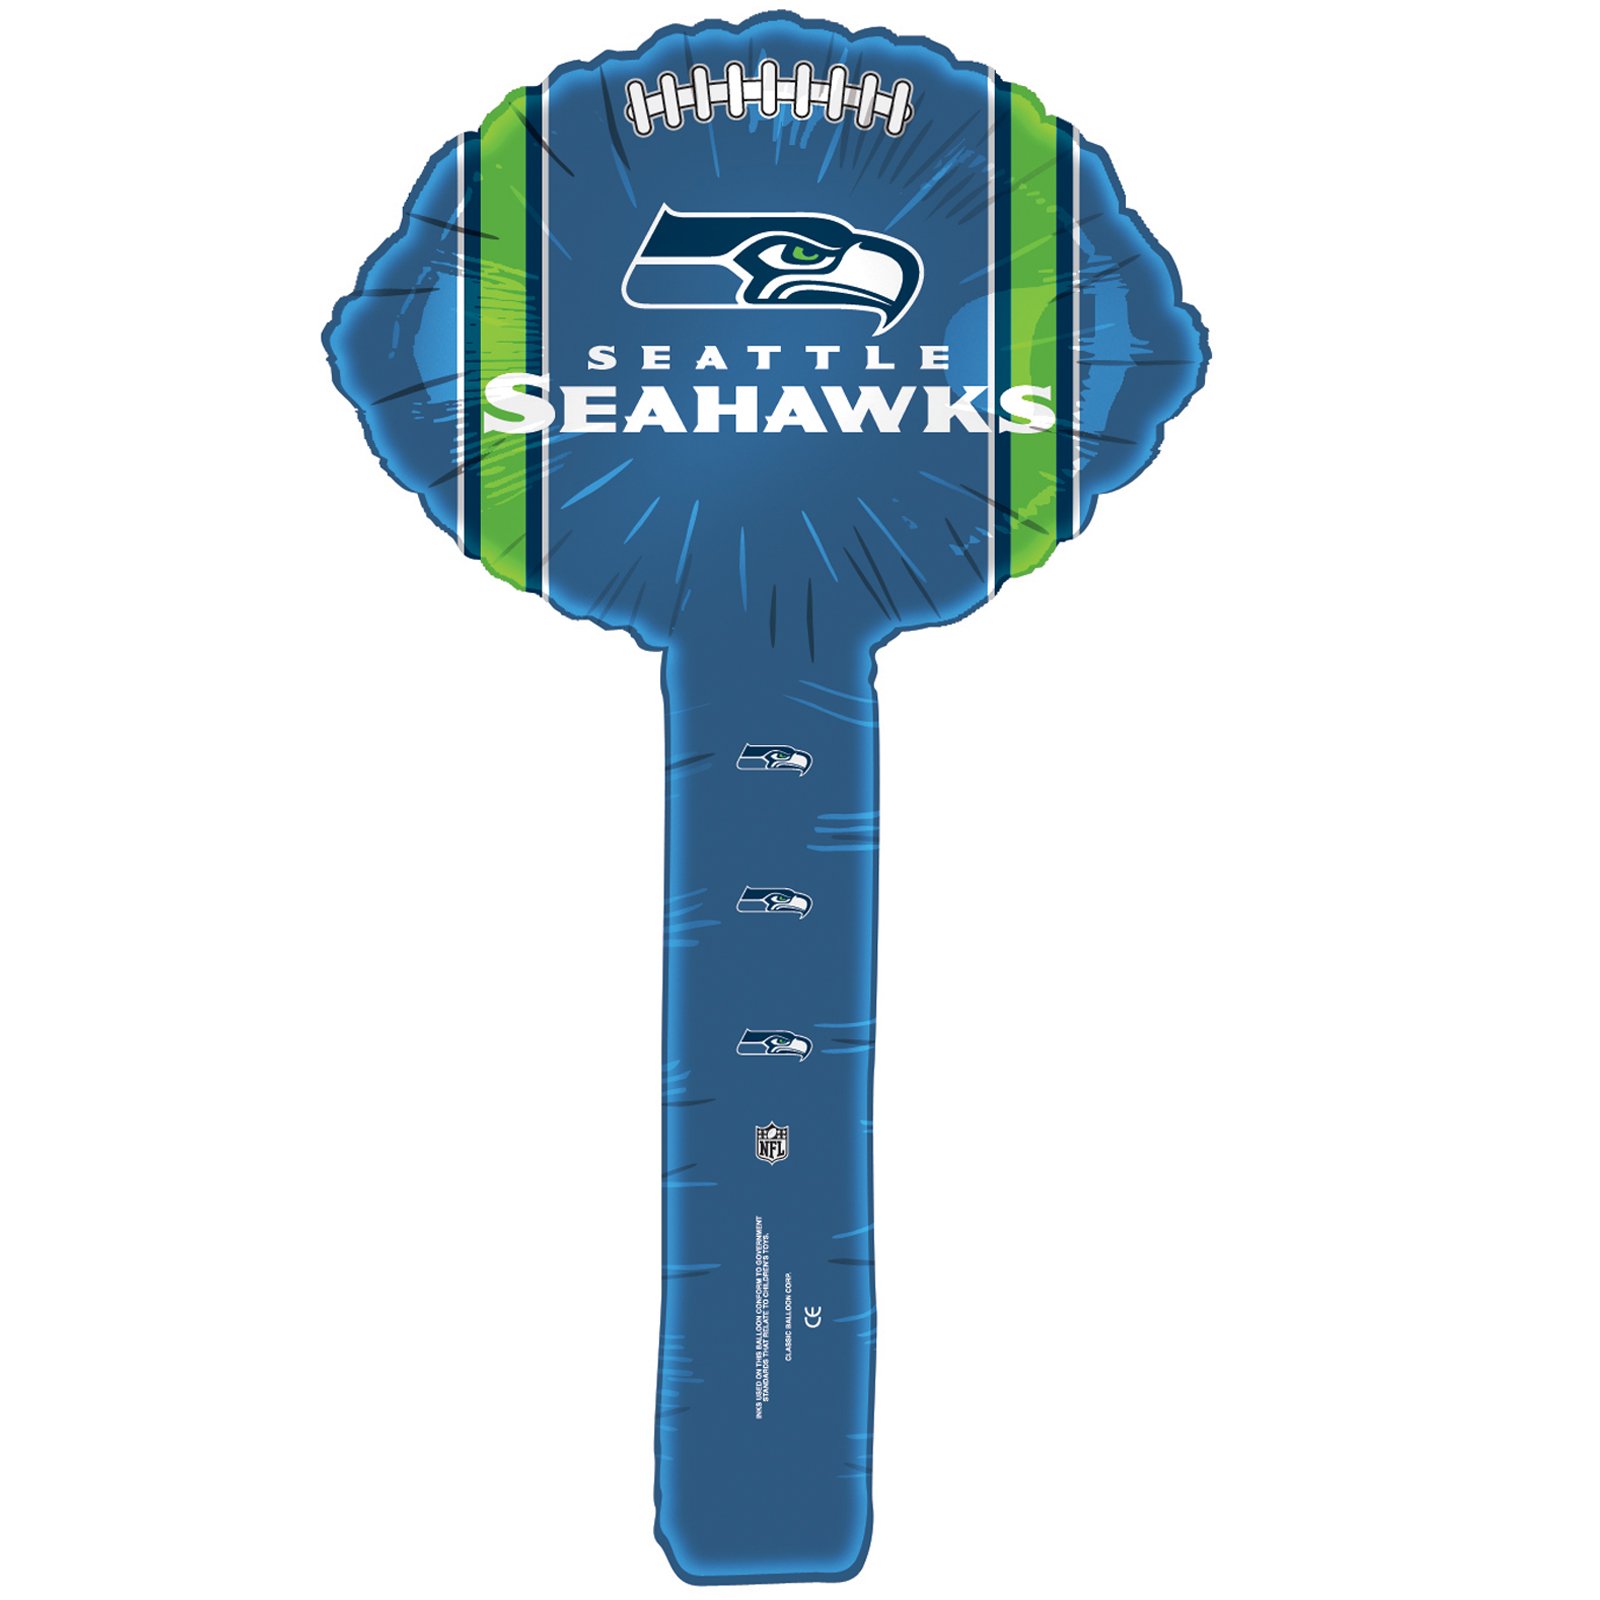 Seattle Seahawks - Foil Hammer Balloons (8 count)